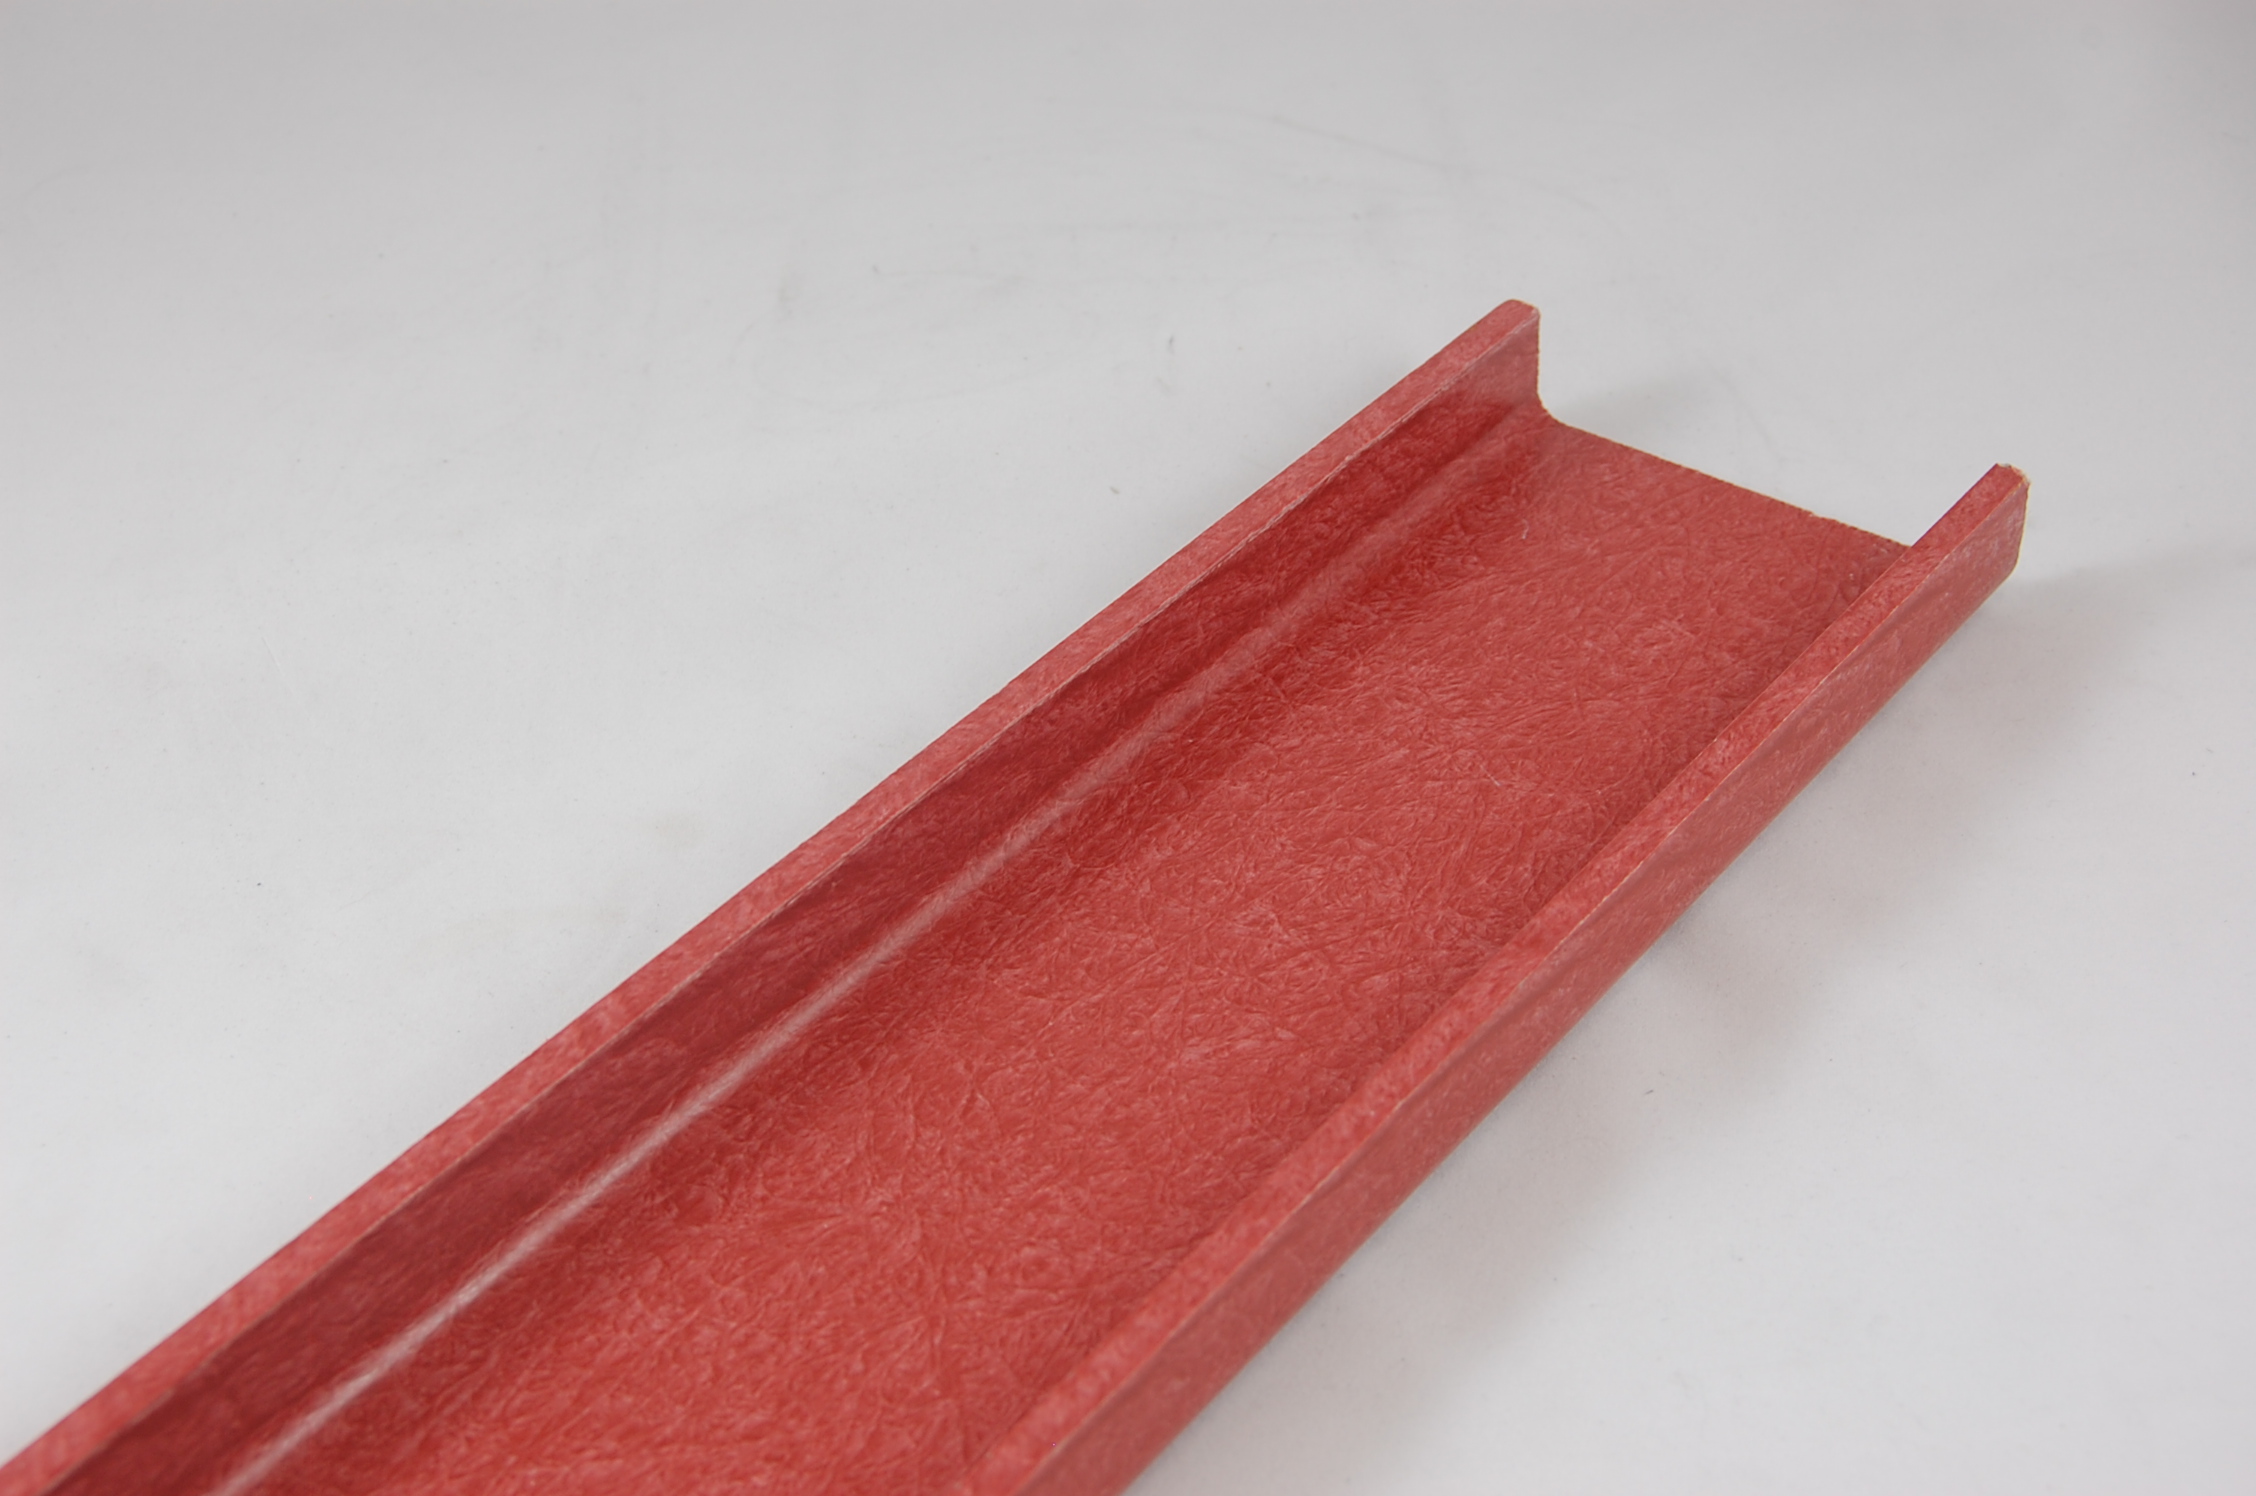 4-3/4"W x 1 5/8" Leg x 3/16" thick GLASROD® Grade 1130 Fiberglass-Reinforced Polyester Laminate Channel, red,  120"L channel